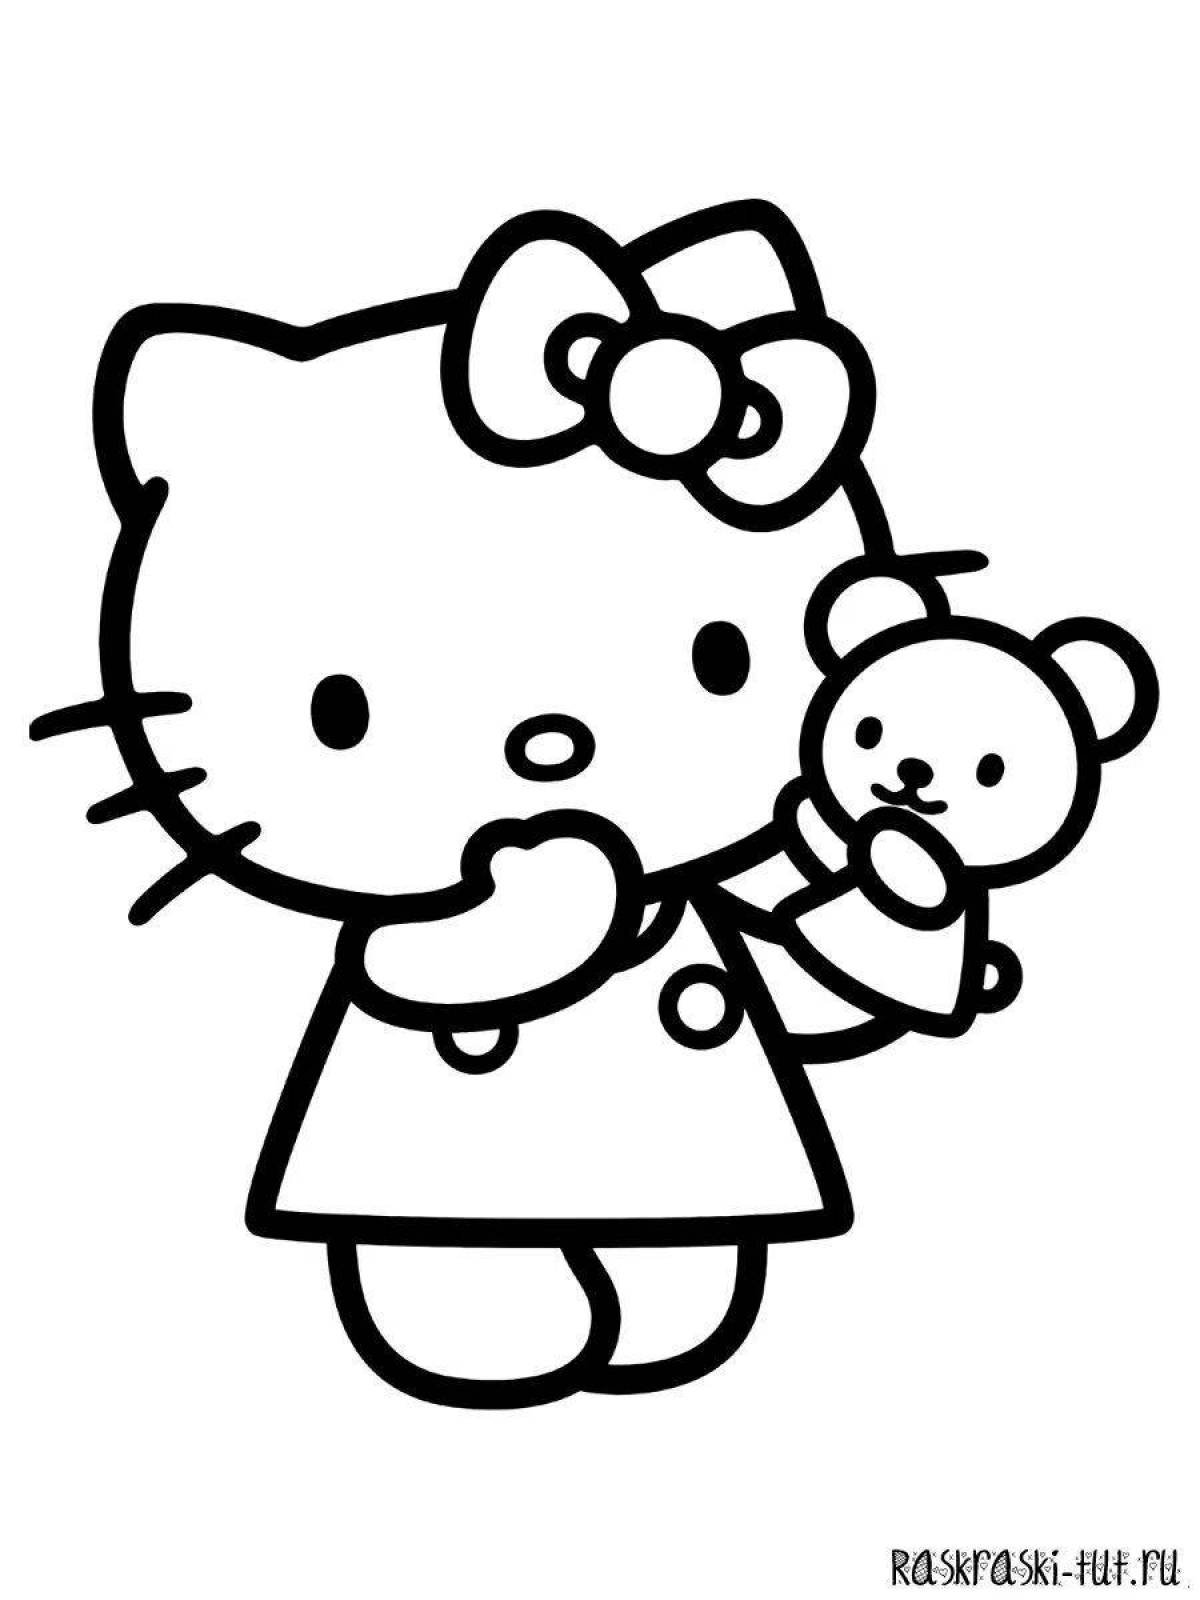 Coloring book with playful hello kitty characters